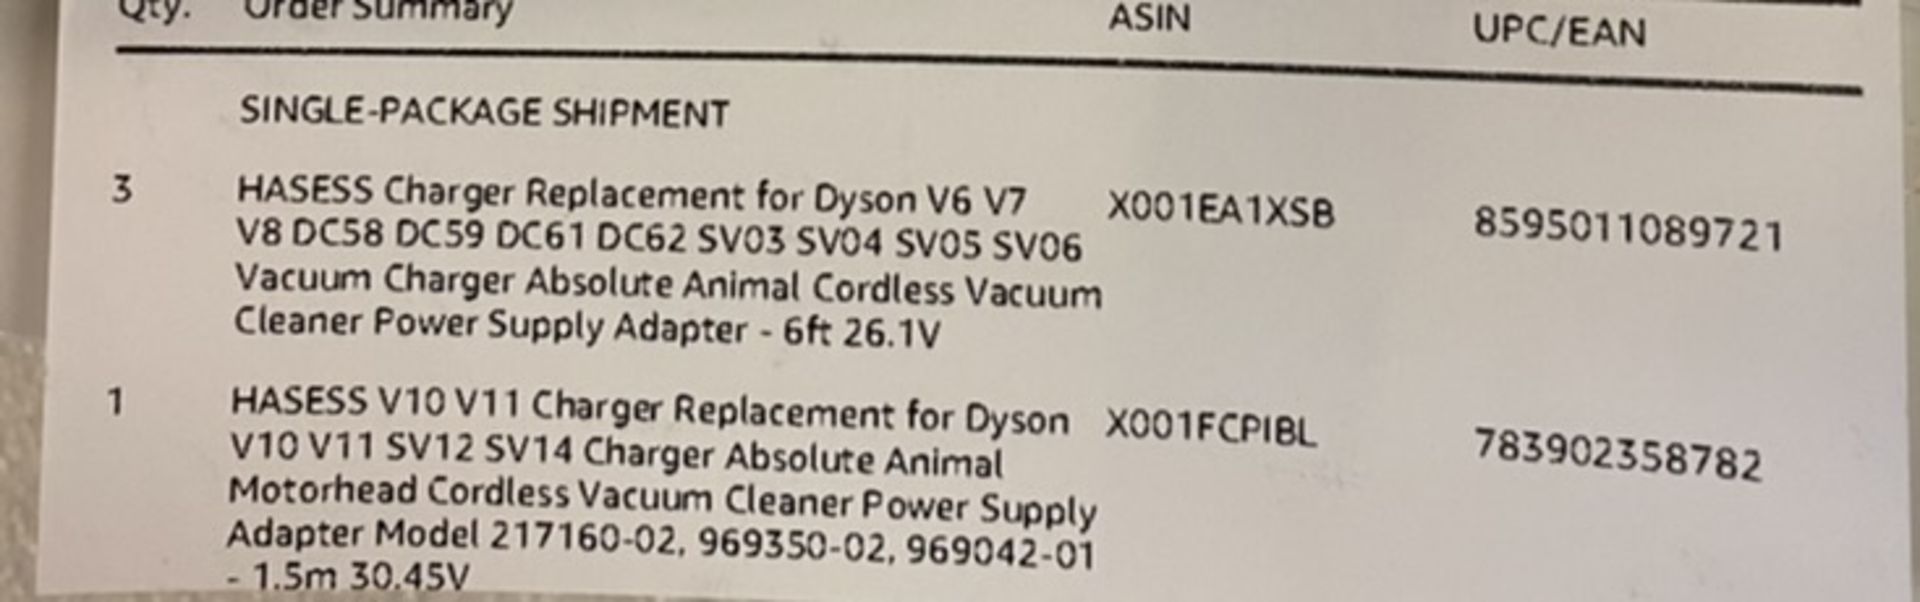 Hasess Replacement Chargers for Dyson (for model/ description, see image) - Image 3 of 3